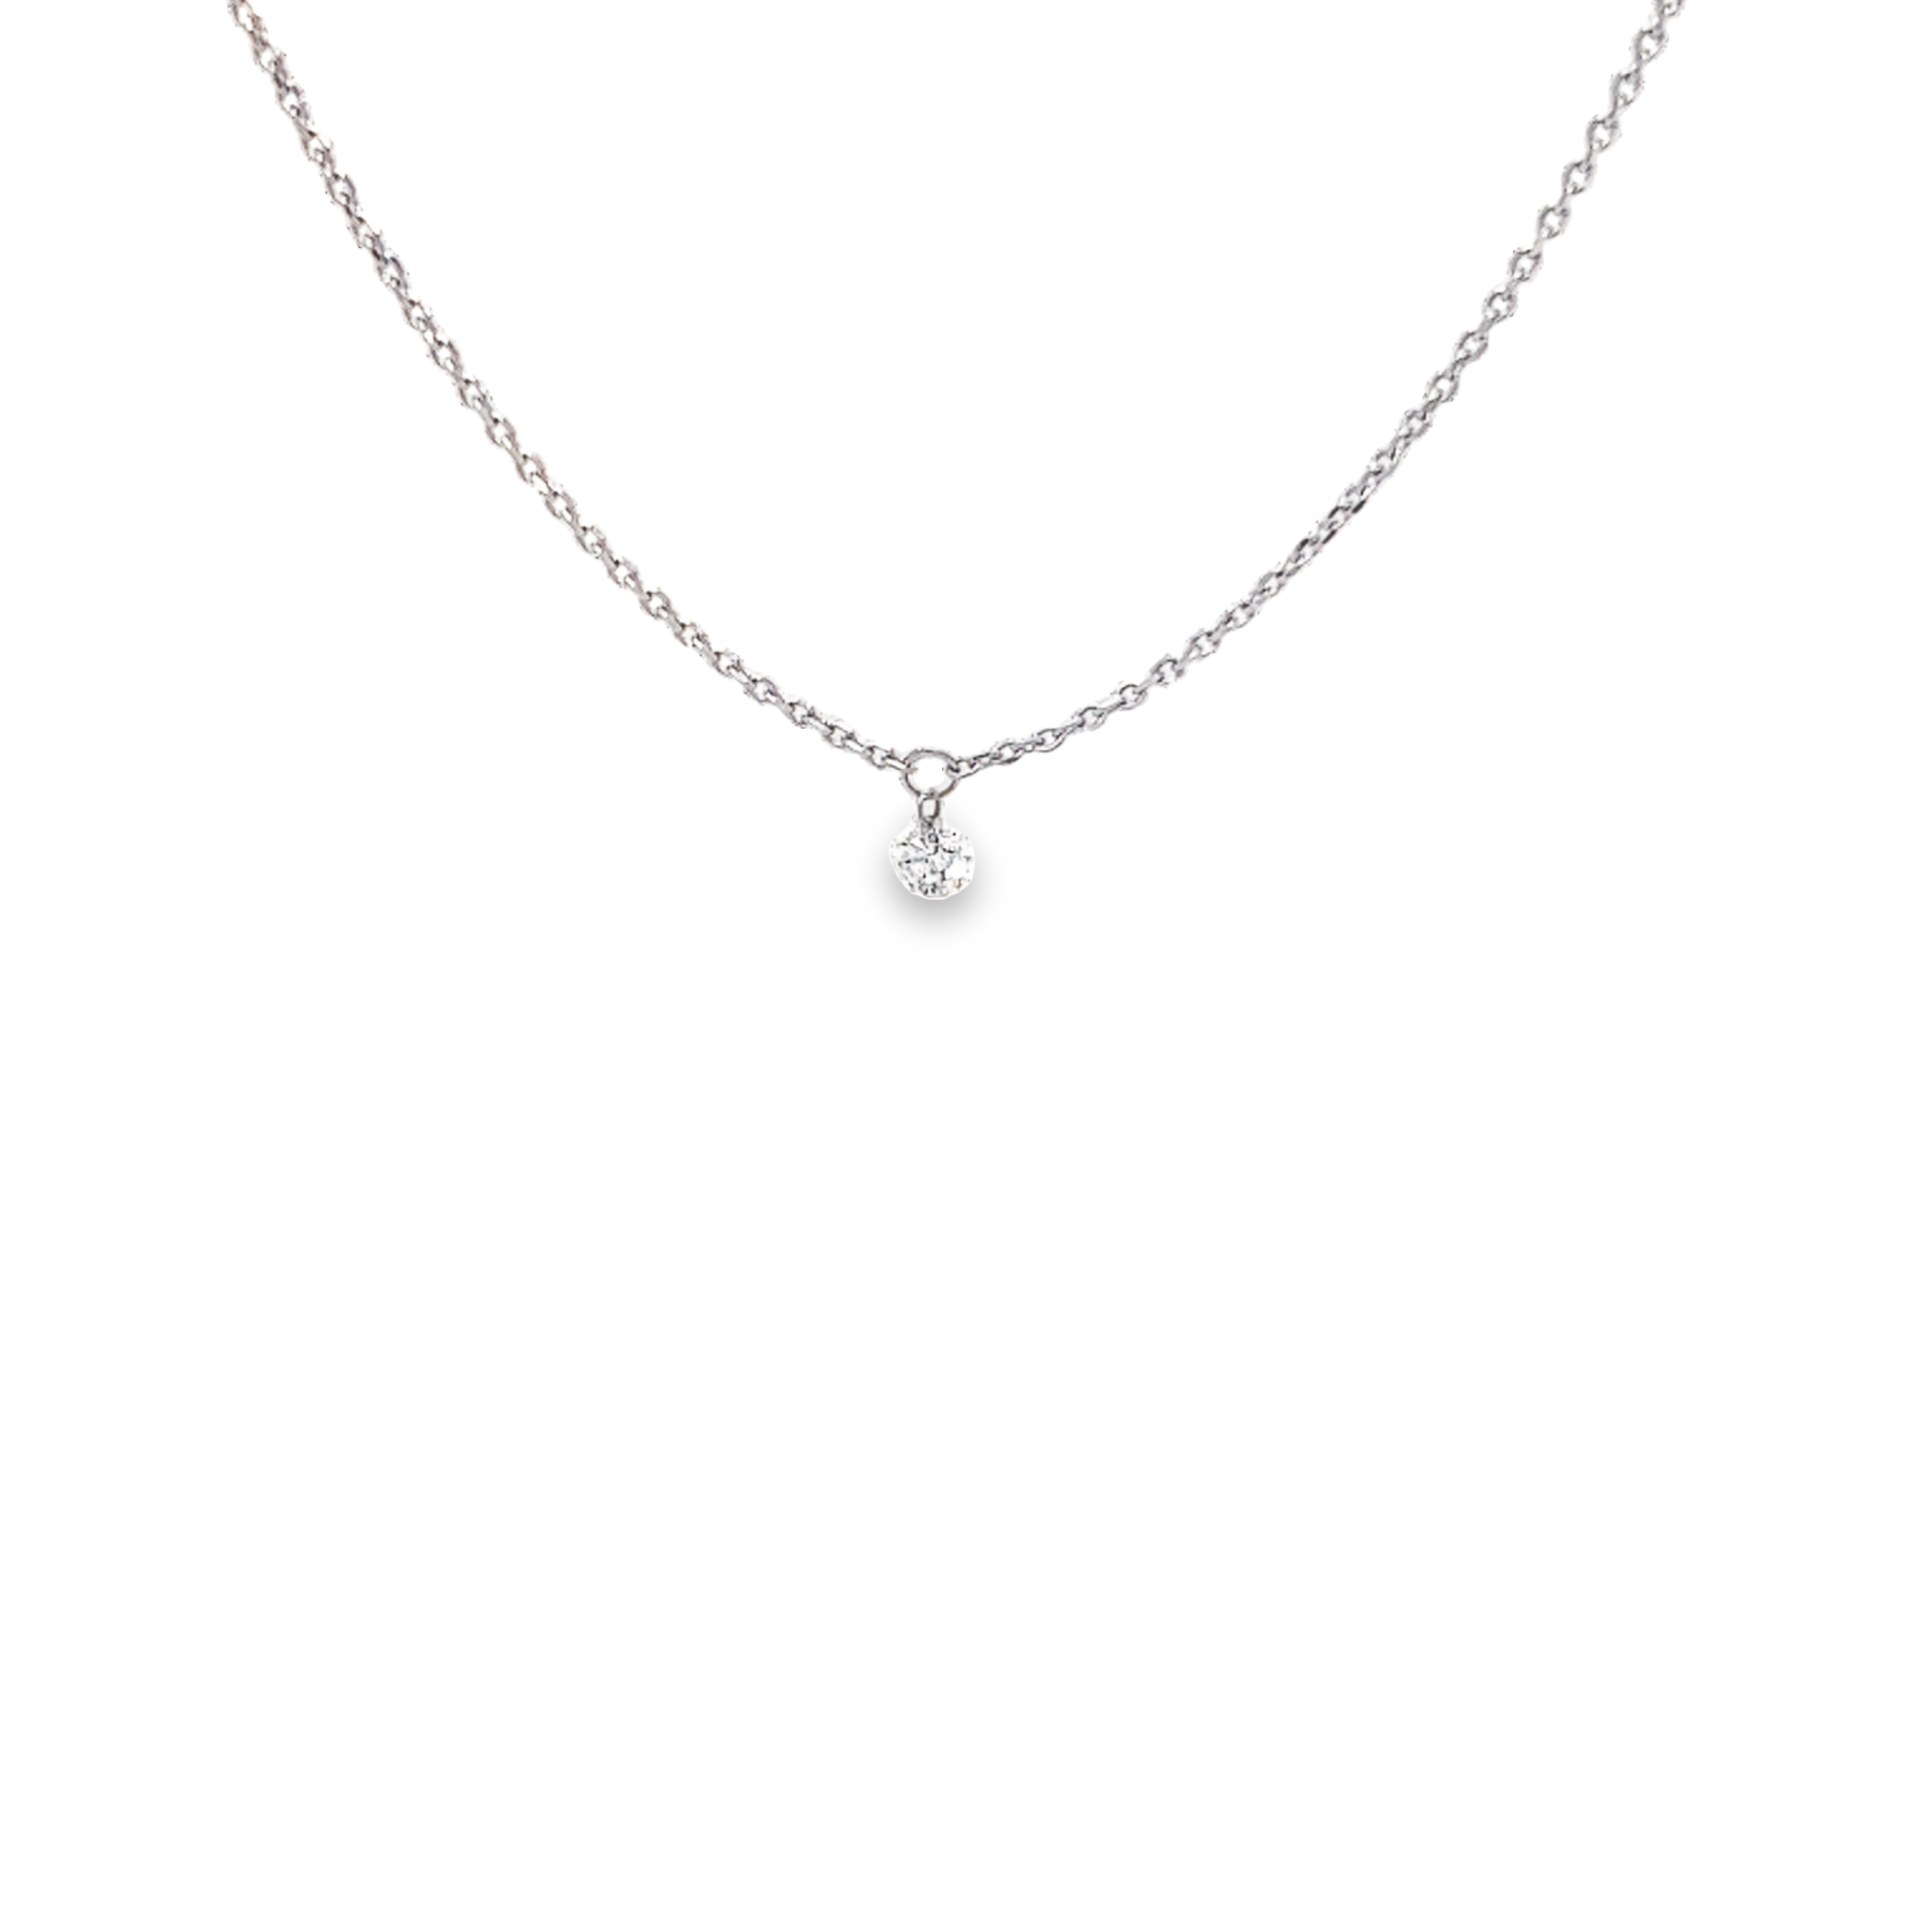 14 Karat white gold solitaire necklace with one 0.10ct Round Brilliant G I Diamond